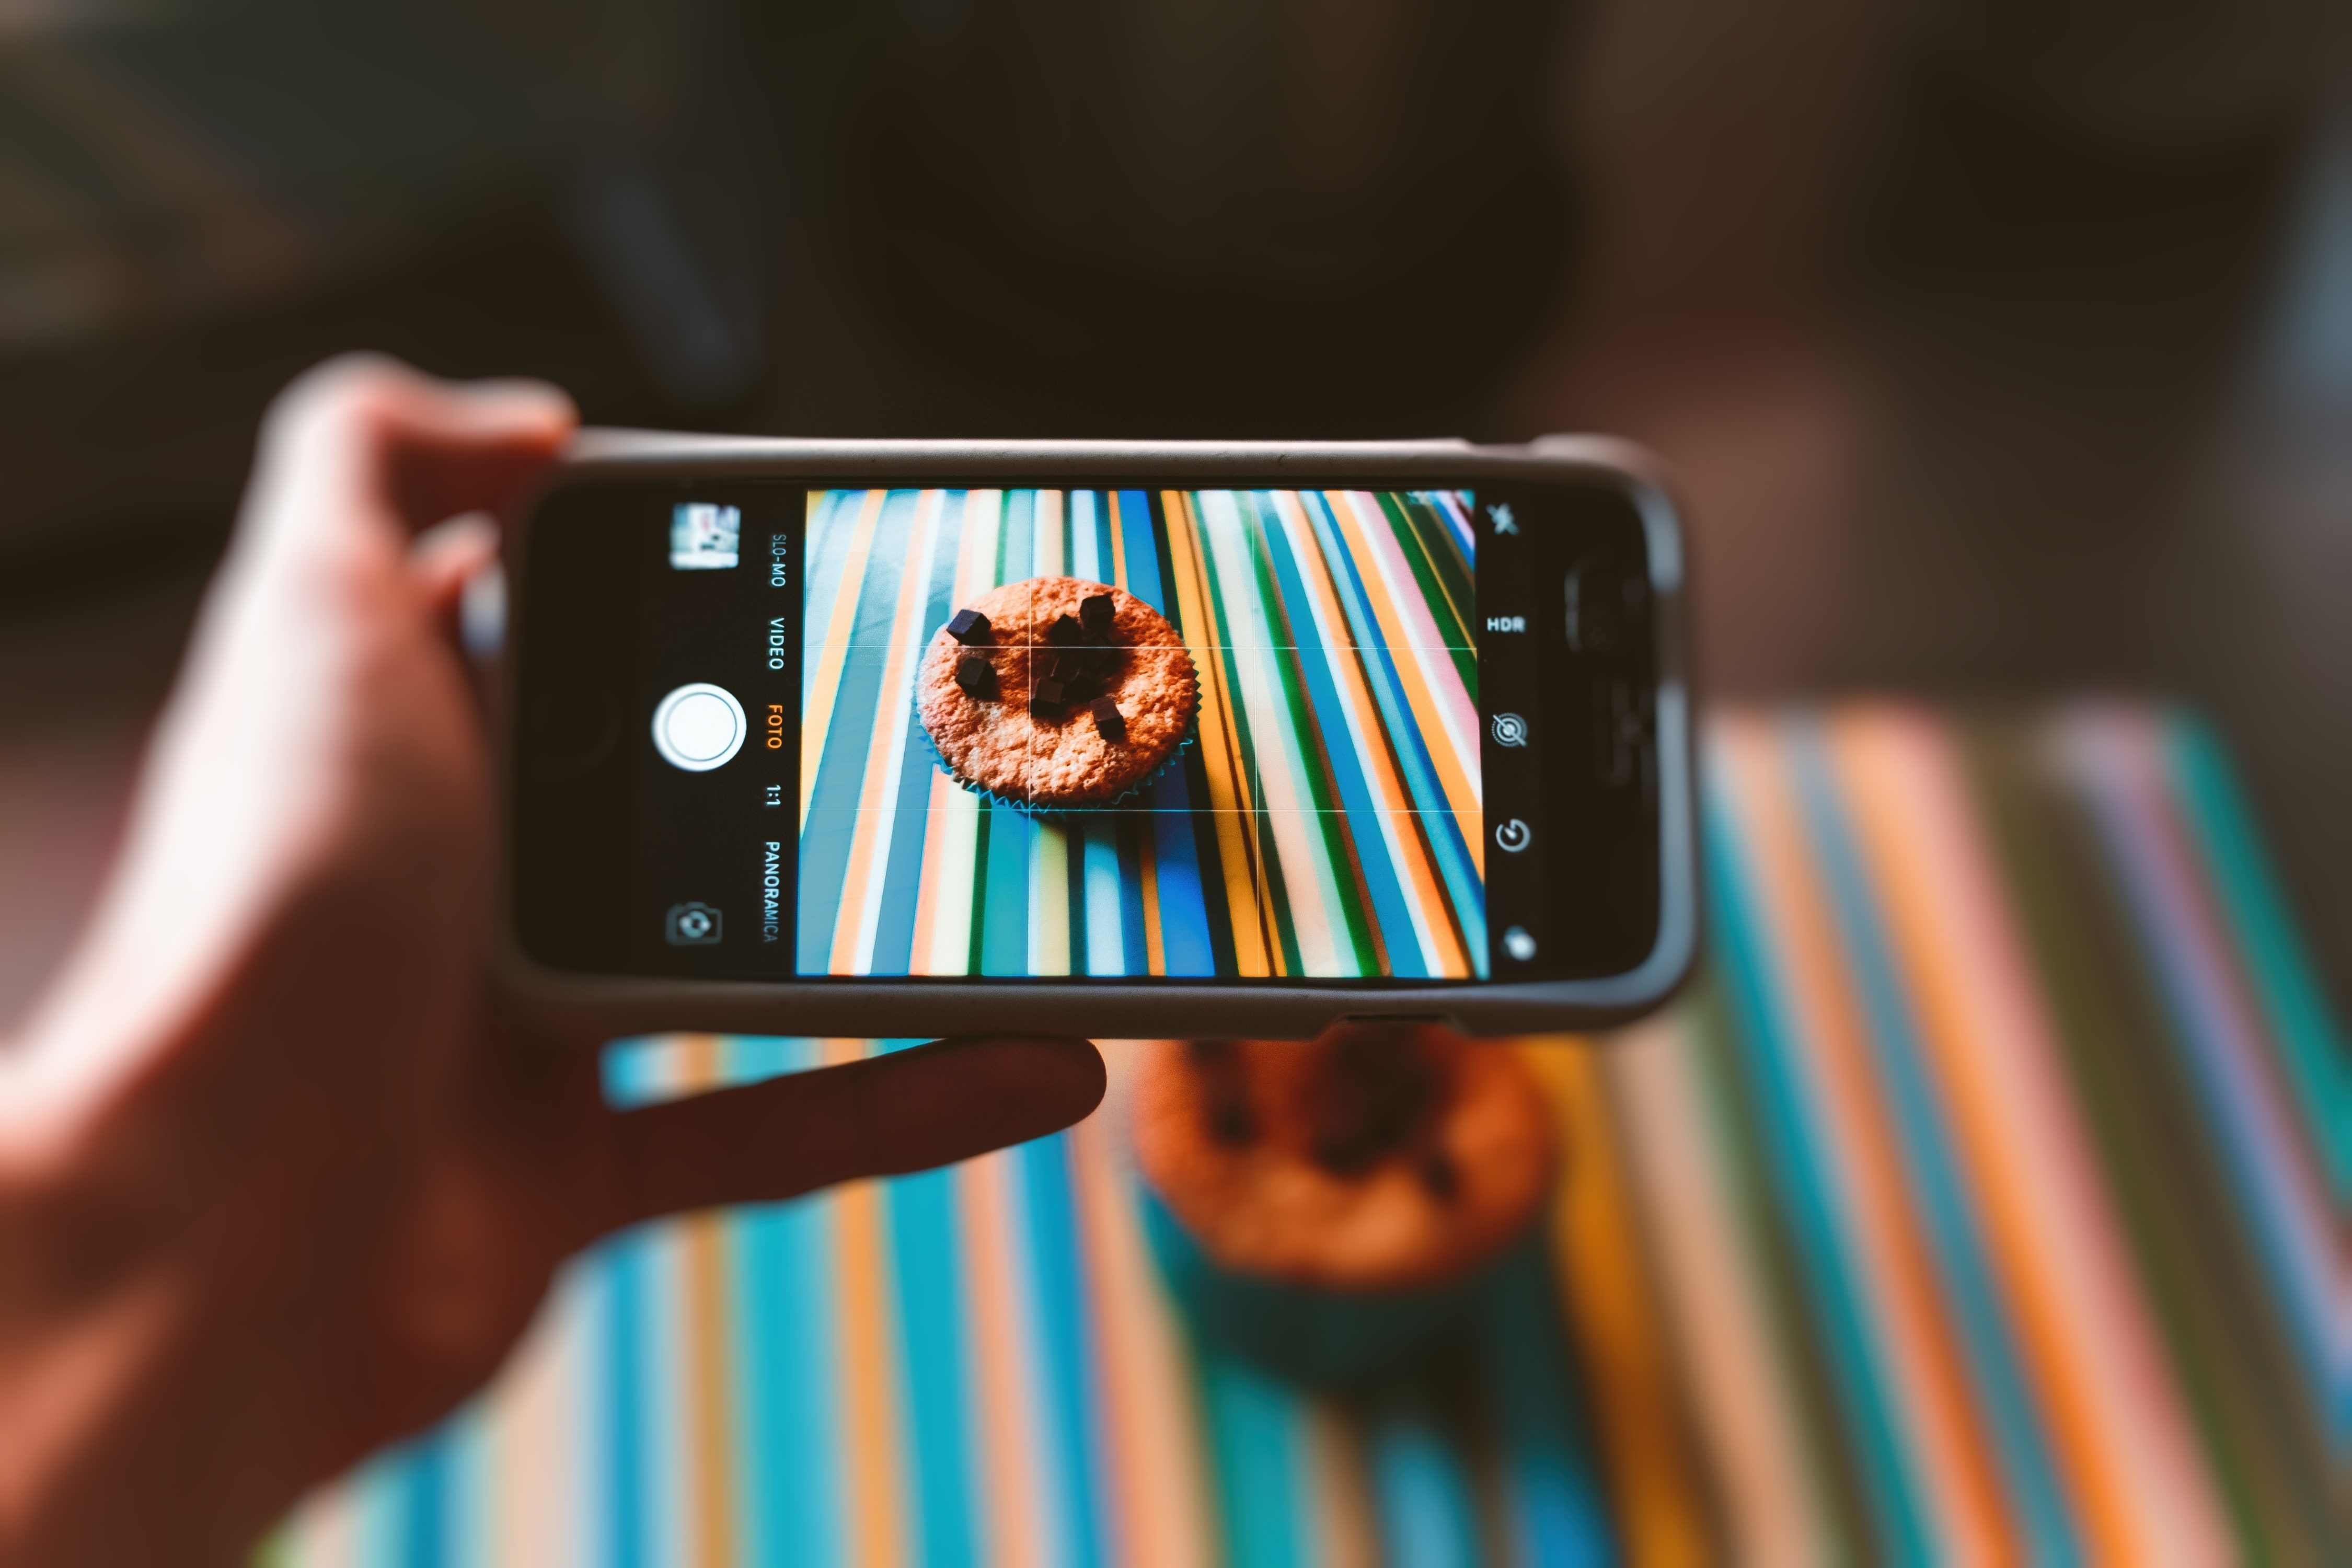  Top Instagram Tips For The Photo Obsessed